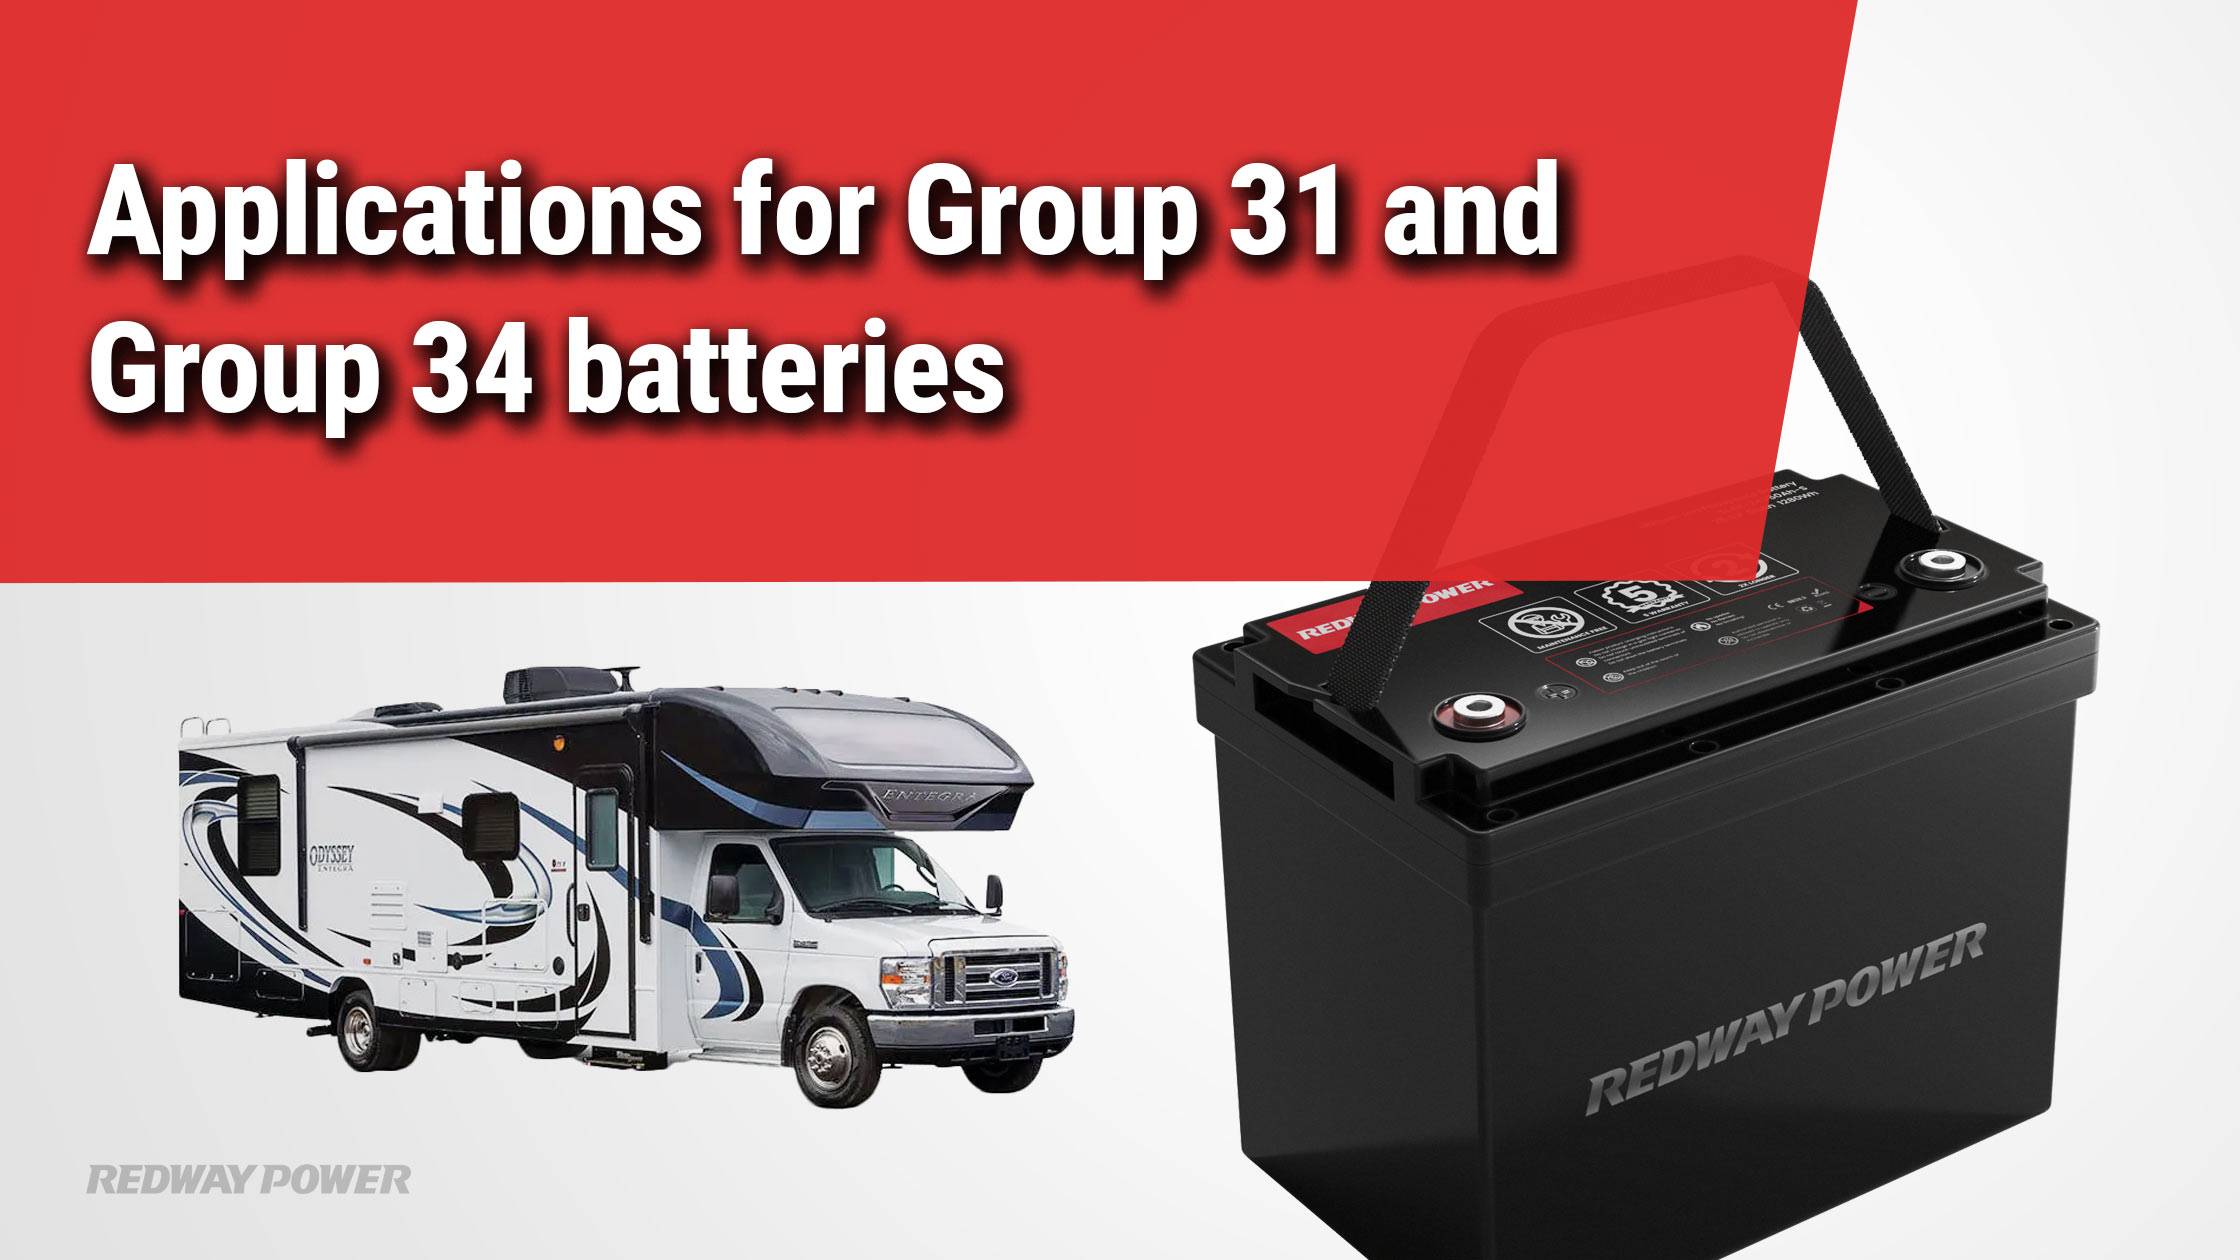 Applications for Group 31 and Group 34 batteries. Difference Between Group 31 and Group 34? rv lifepo4 battery redway 12v 100ah